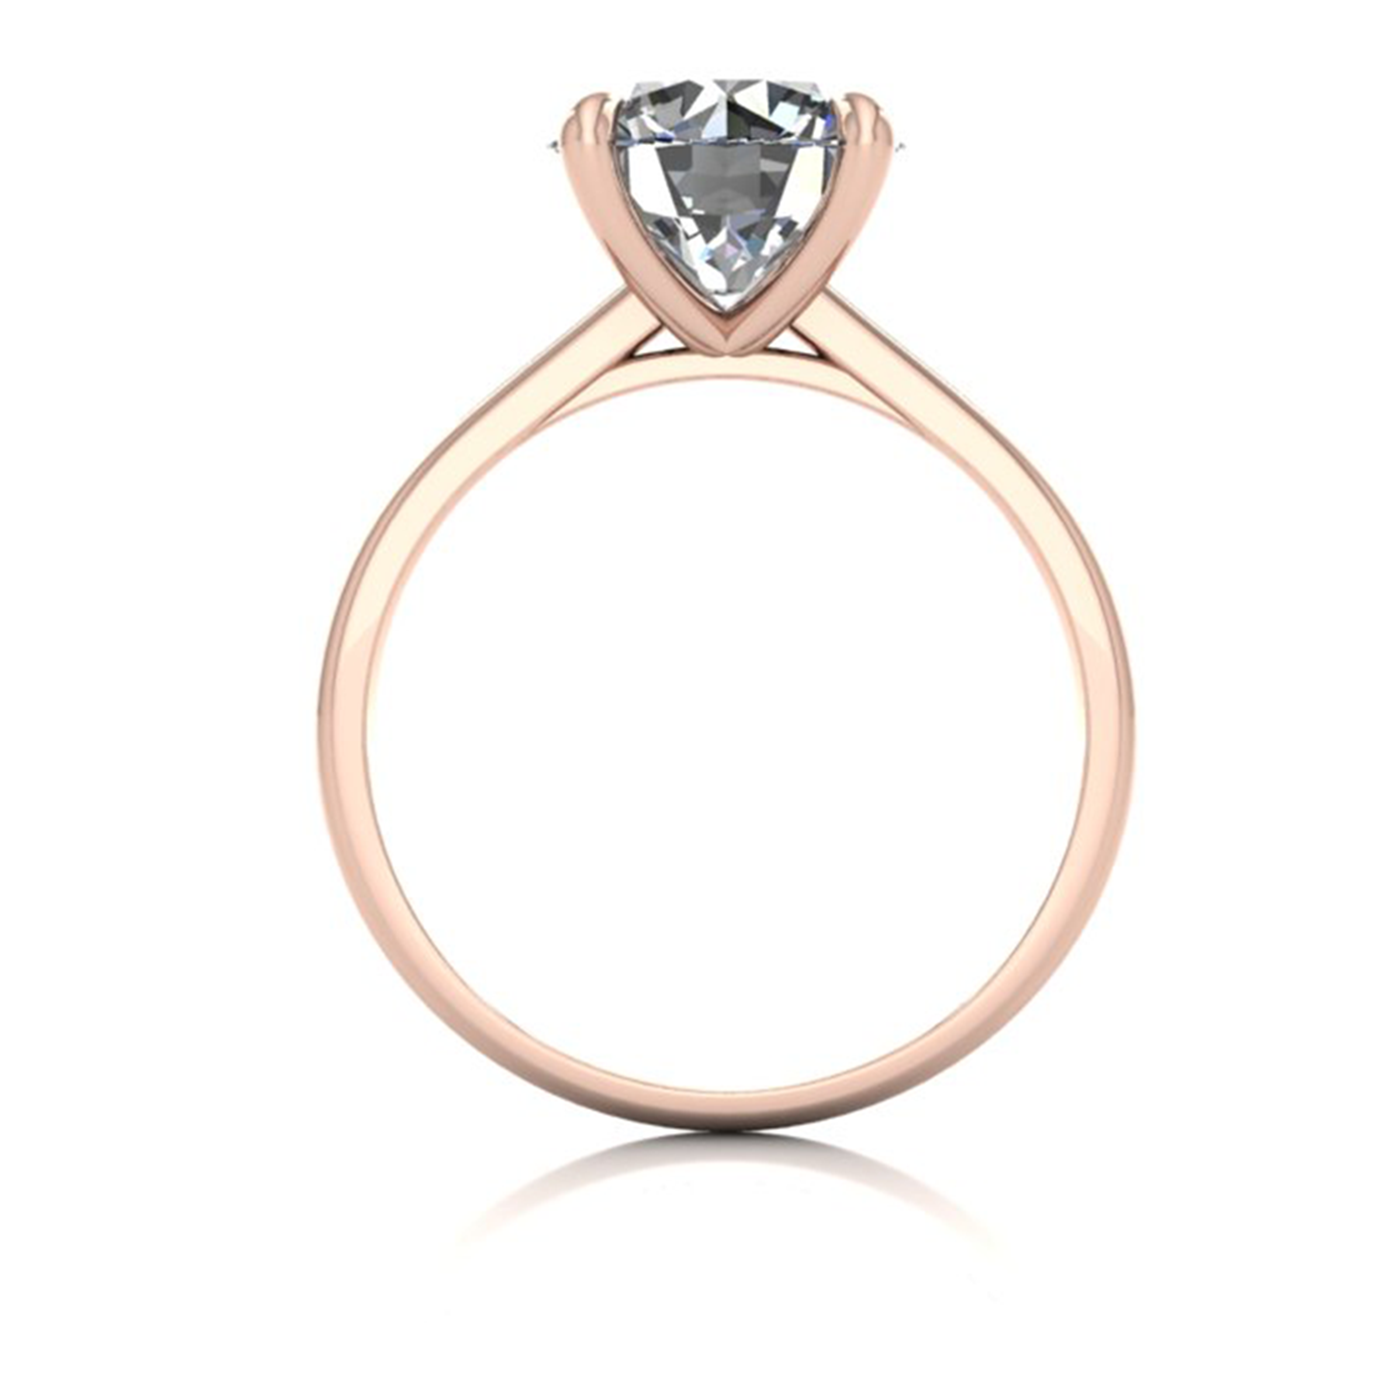 18k rose gold 2.5 ct 4 prongs solitaire round cut diamond engagement ring with whisper thin band